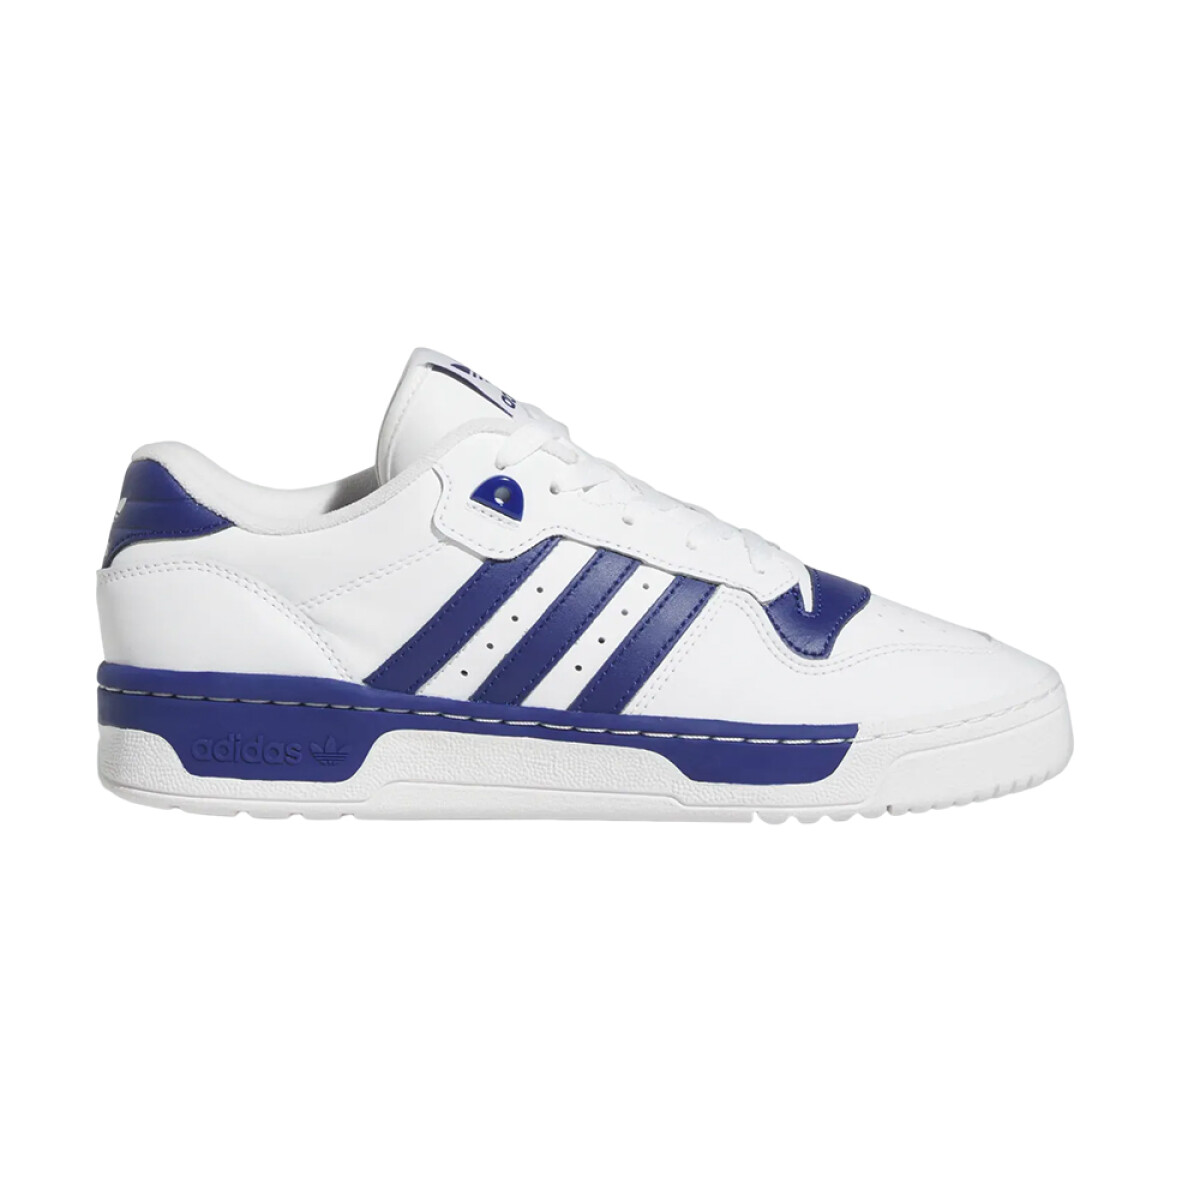 adidas RIVALRY LOW - Blue/White 